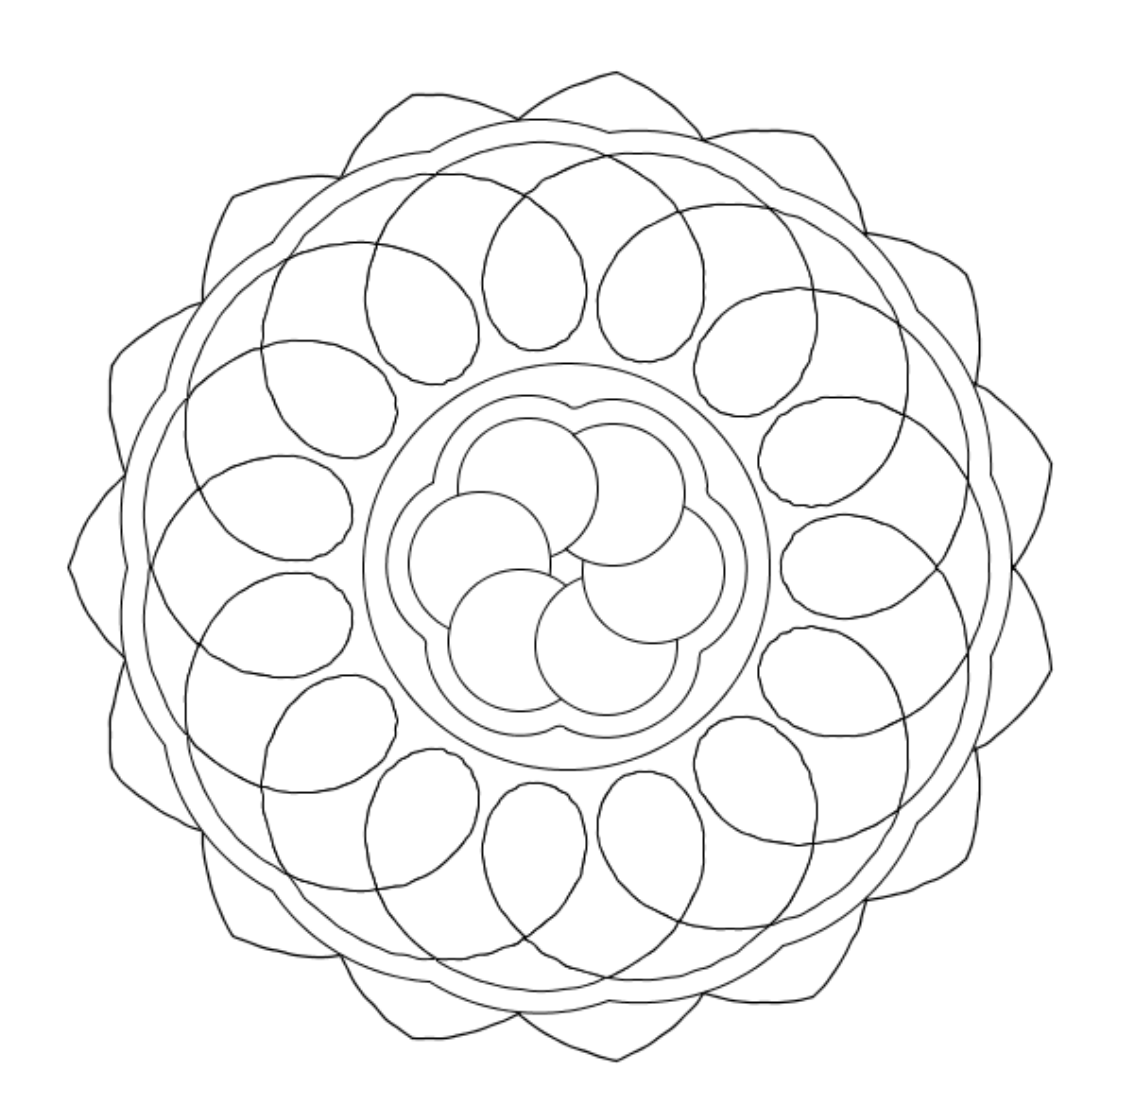 Mandala Coloring Pages Easy - Coloring Nation